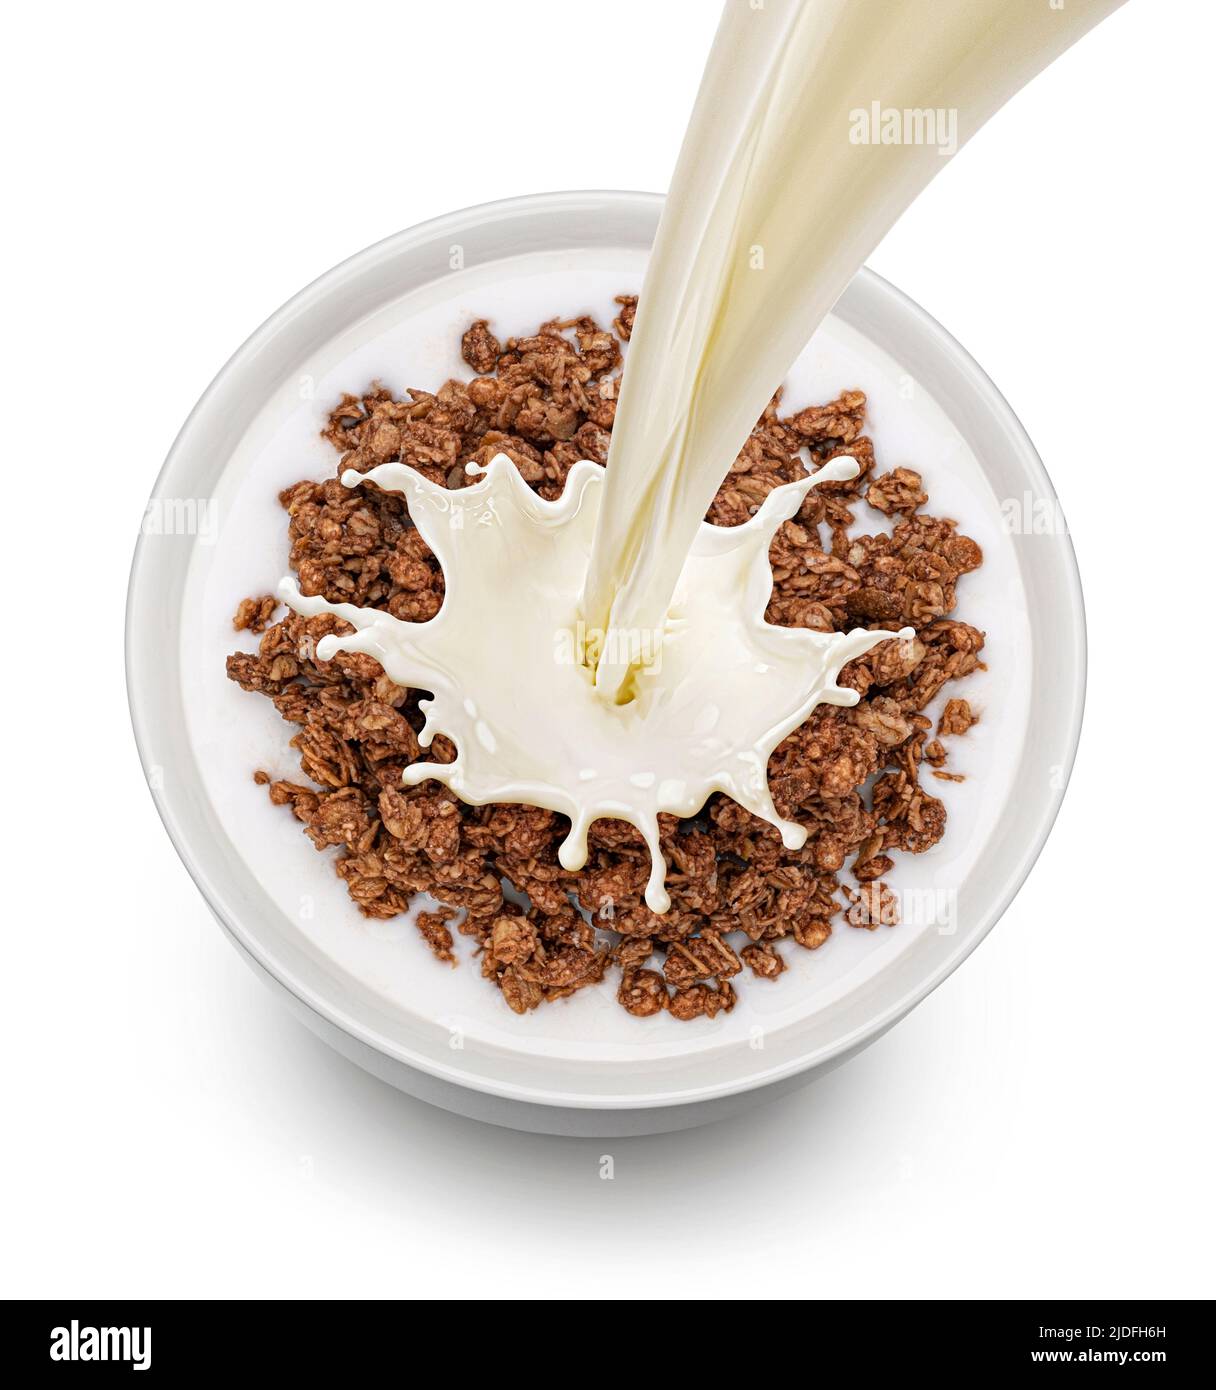 Chocolate granola with milk isolated on white background, top view Stock Photo